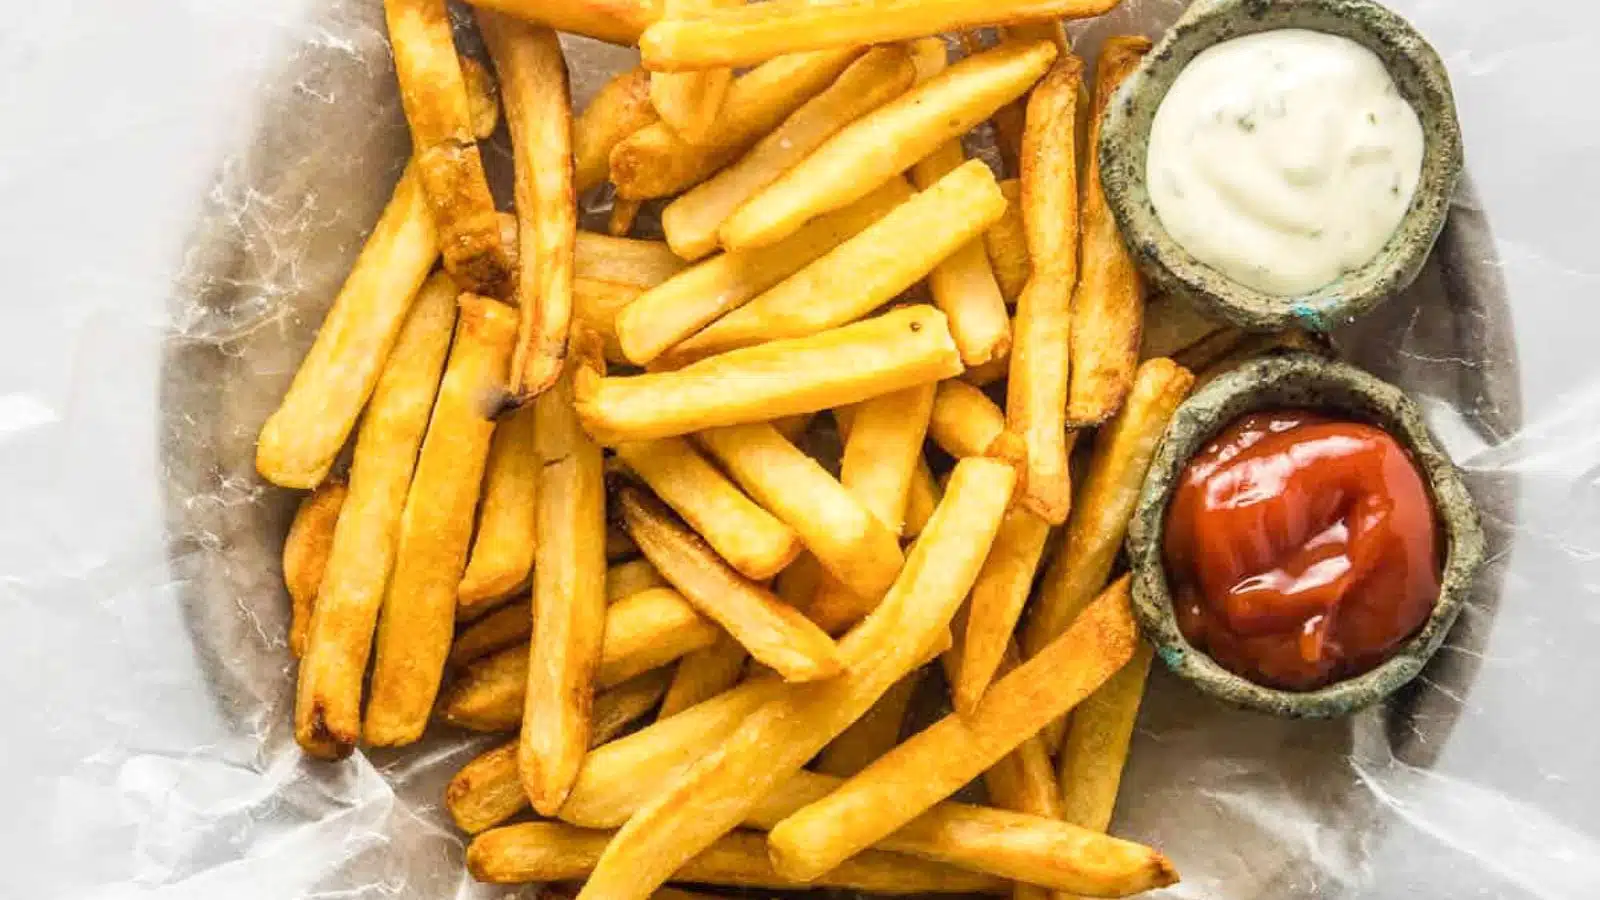 french fries on wax paper with ketchup and a dipping sauce